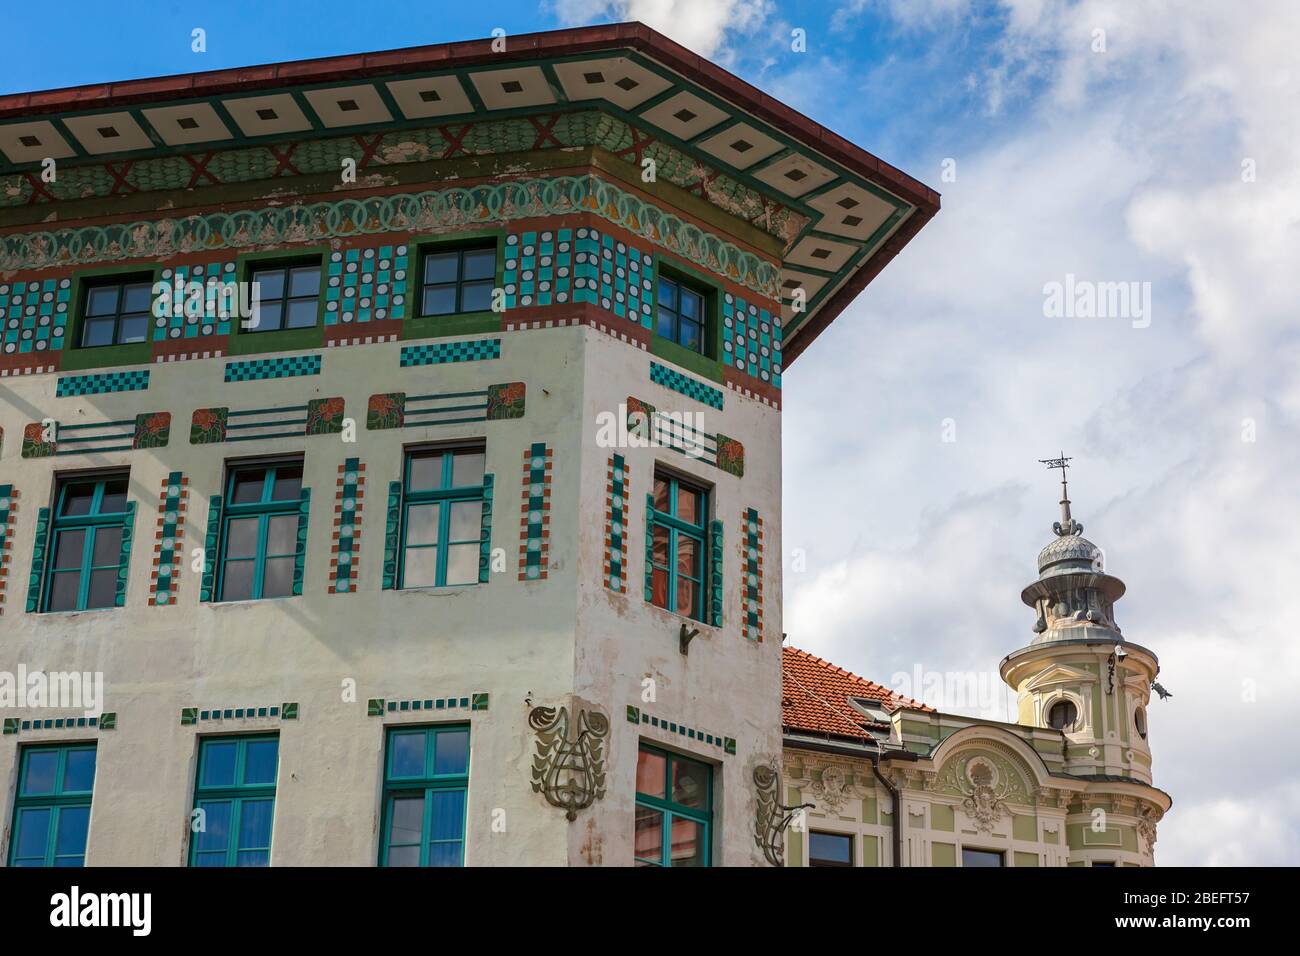 Hauptmann house on Preseren square, one of the gems of art nouveau architecture in Ljubljana, Slovenia Stock Photo